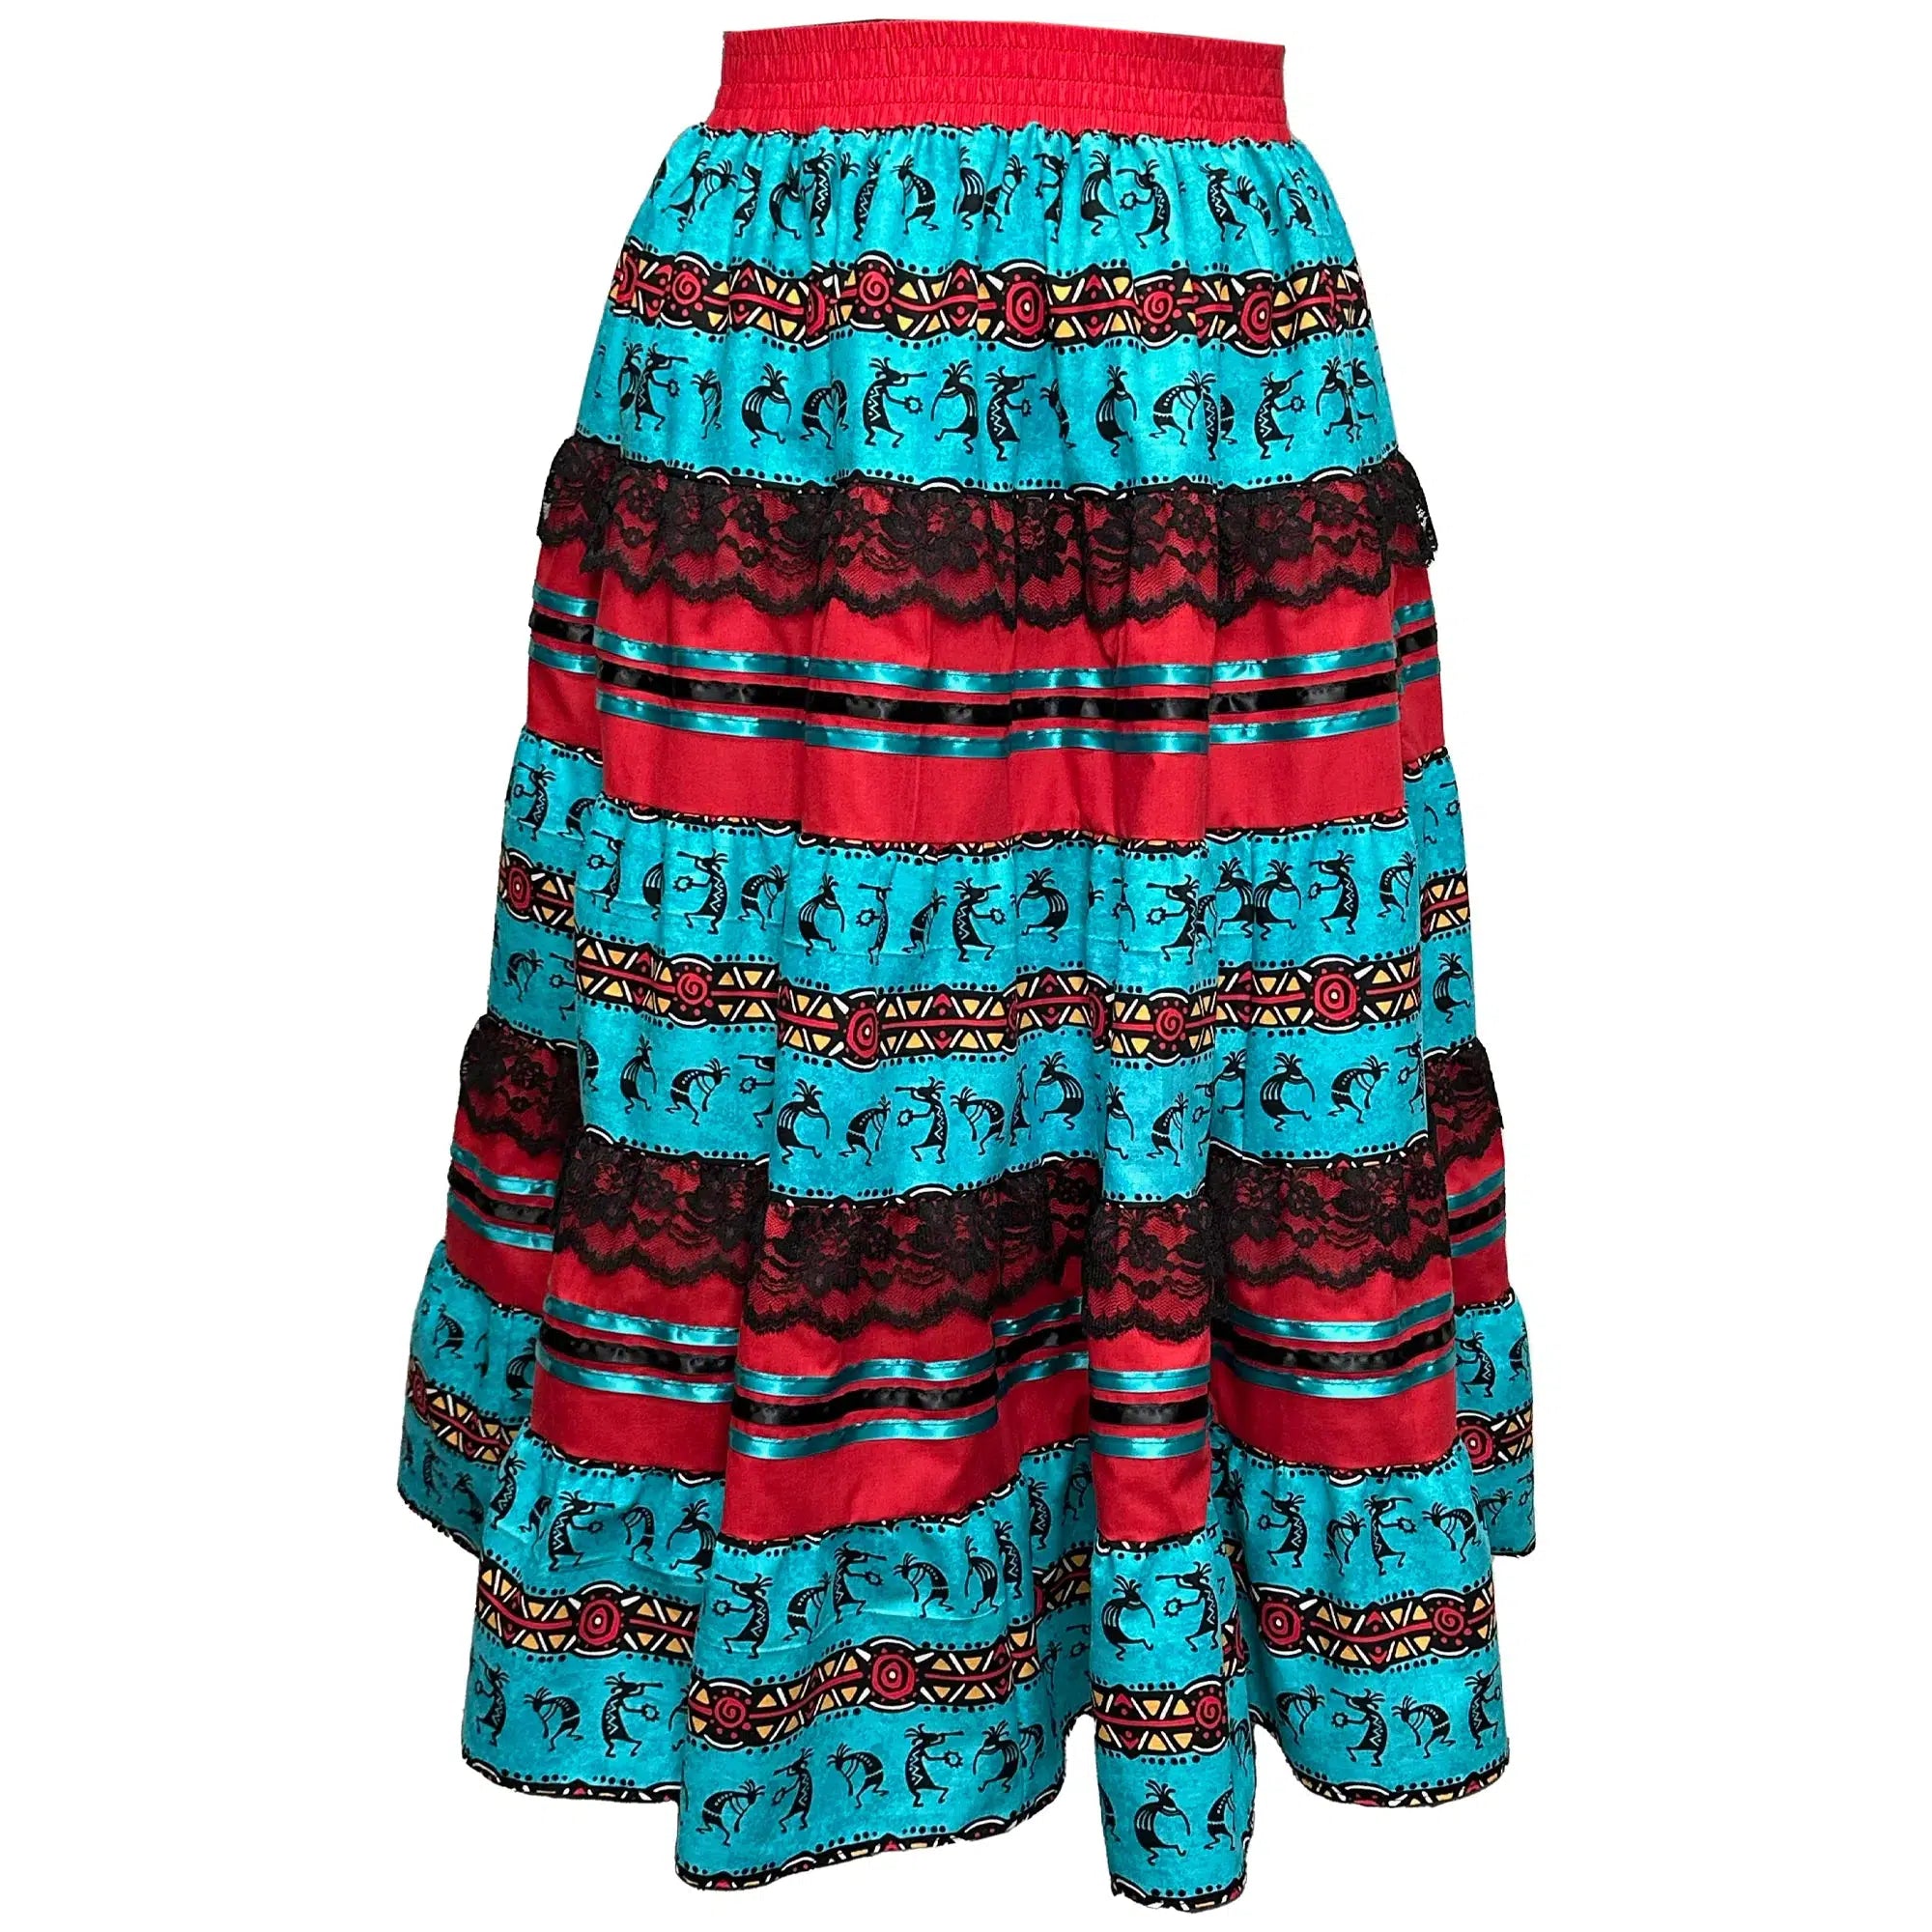 A Kokopelli Prairie Skirt by Square Up Fashions with a red, blue and black pattern.